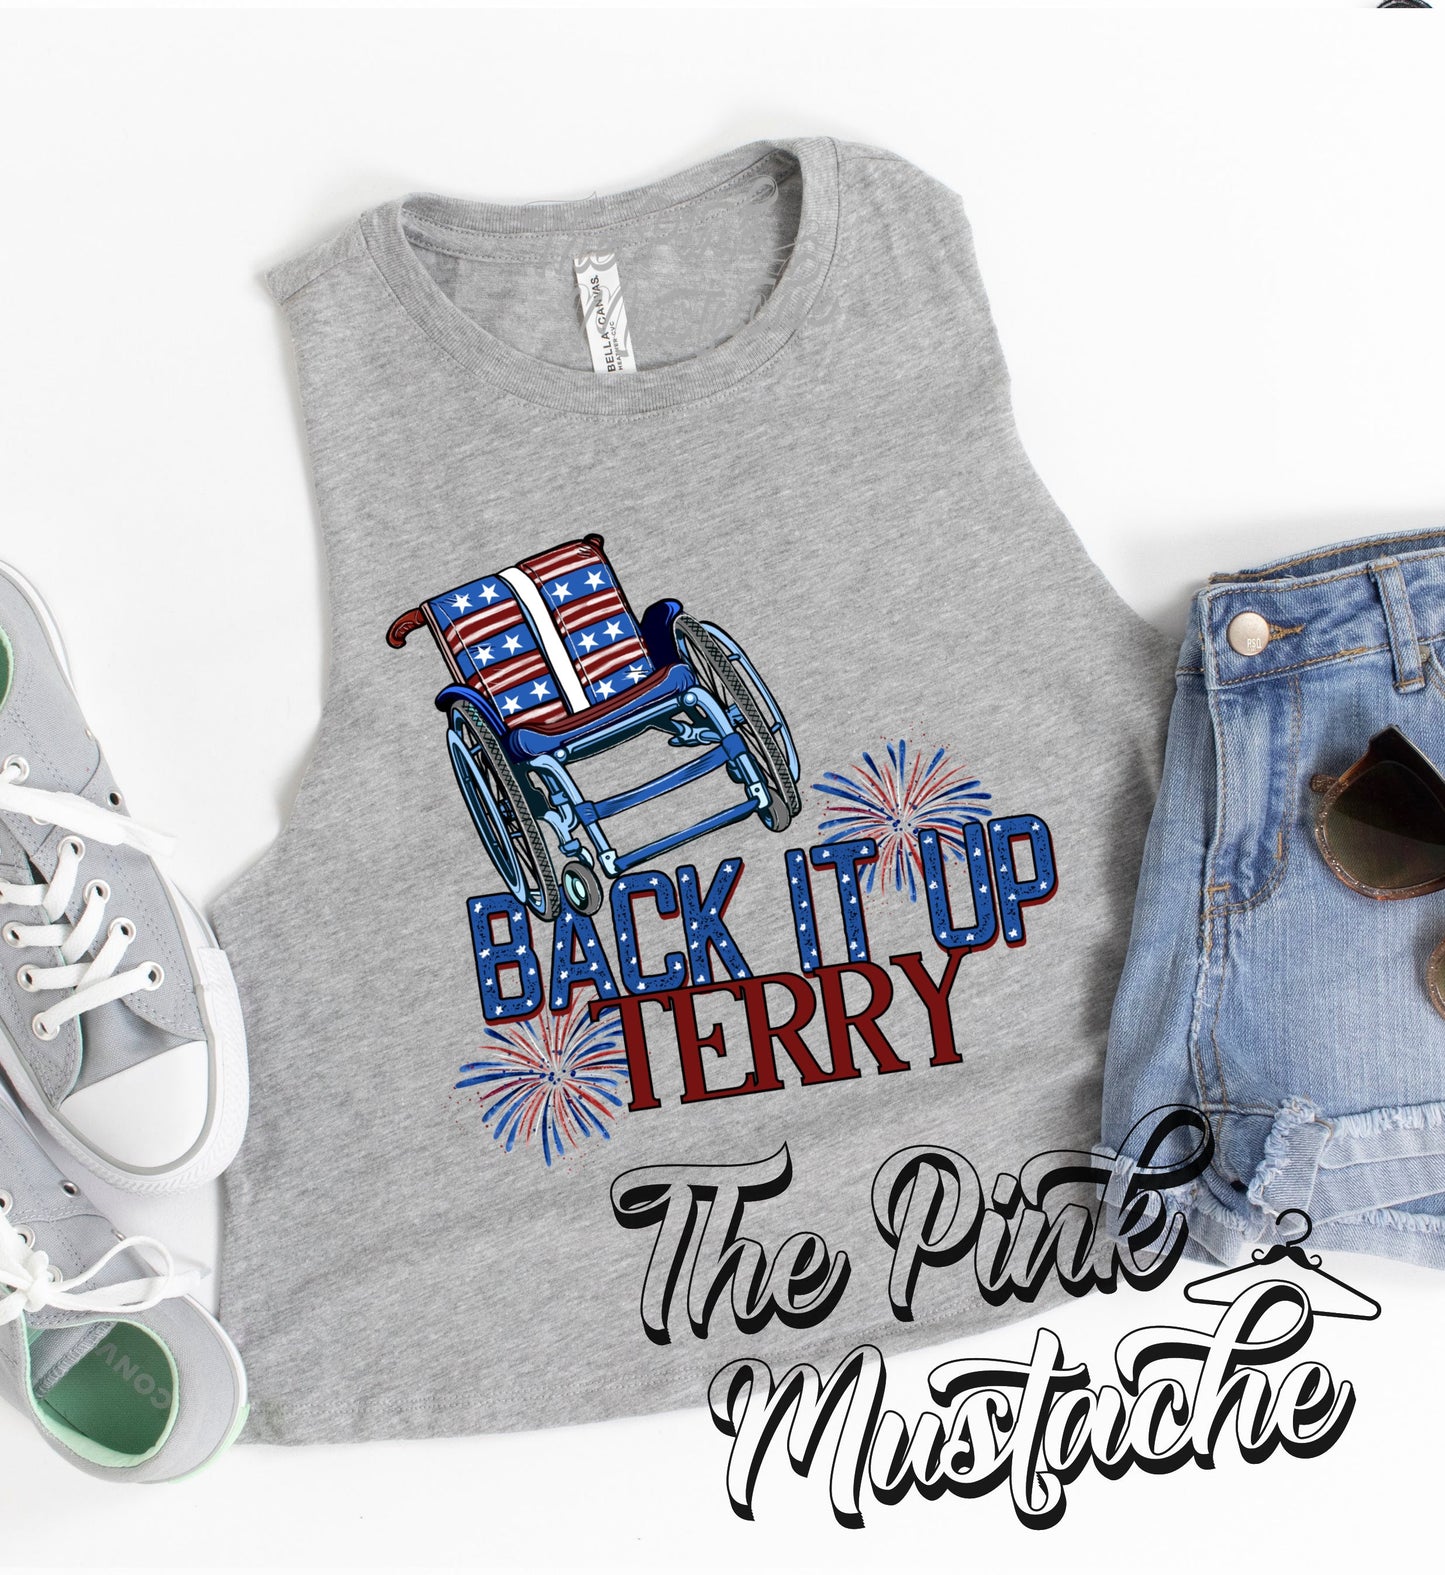 Cropped Back It Up Terry Tank Top / Merica Tank Top / Fourth Of July Tank